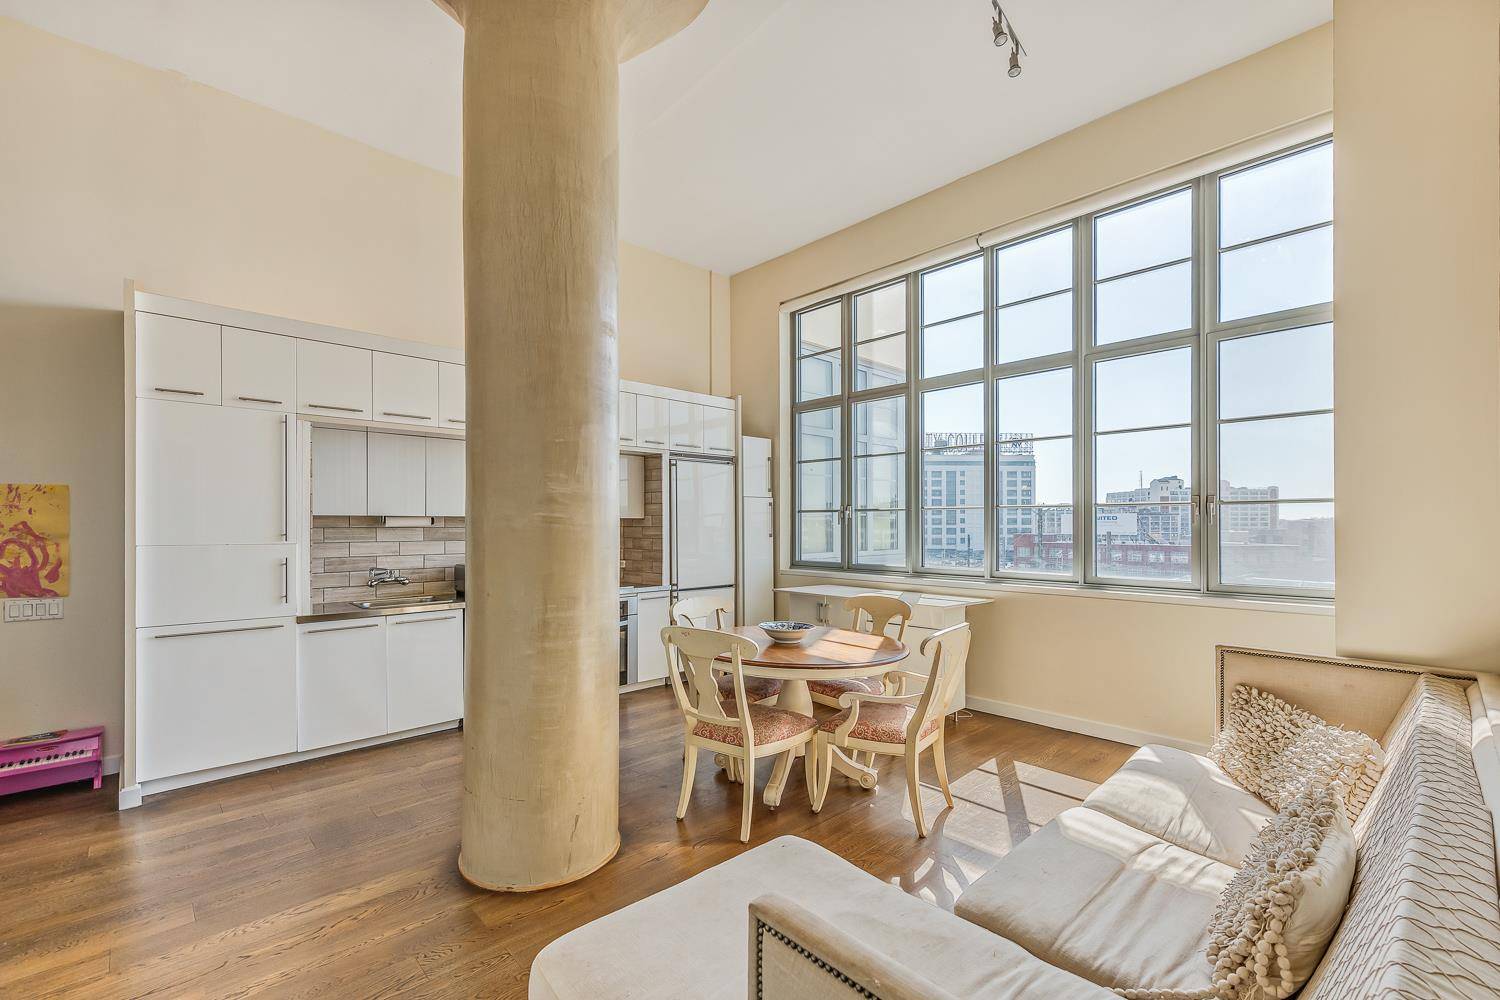 Welcome to this gorgeous sun drenched modern loft with 14 foot ceilings and Long Island City views.